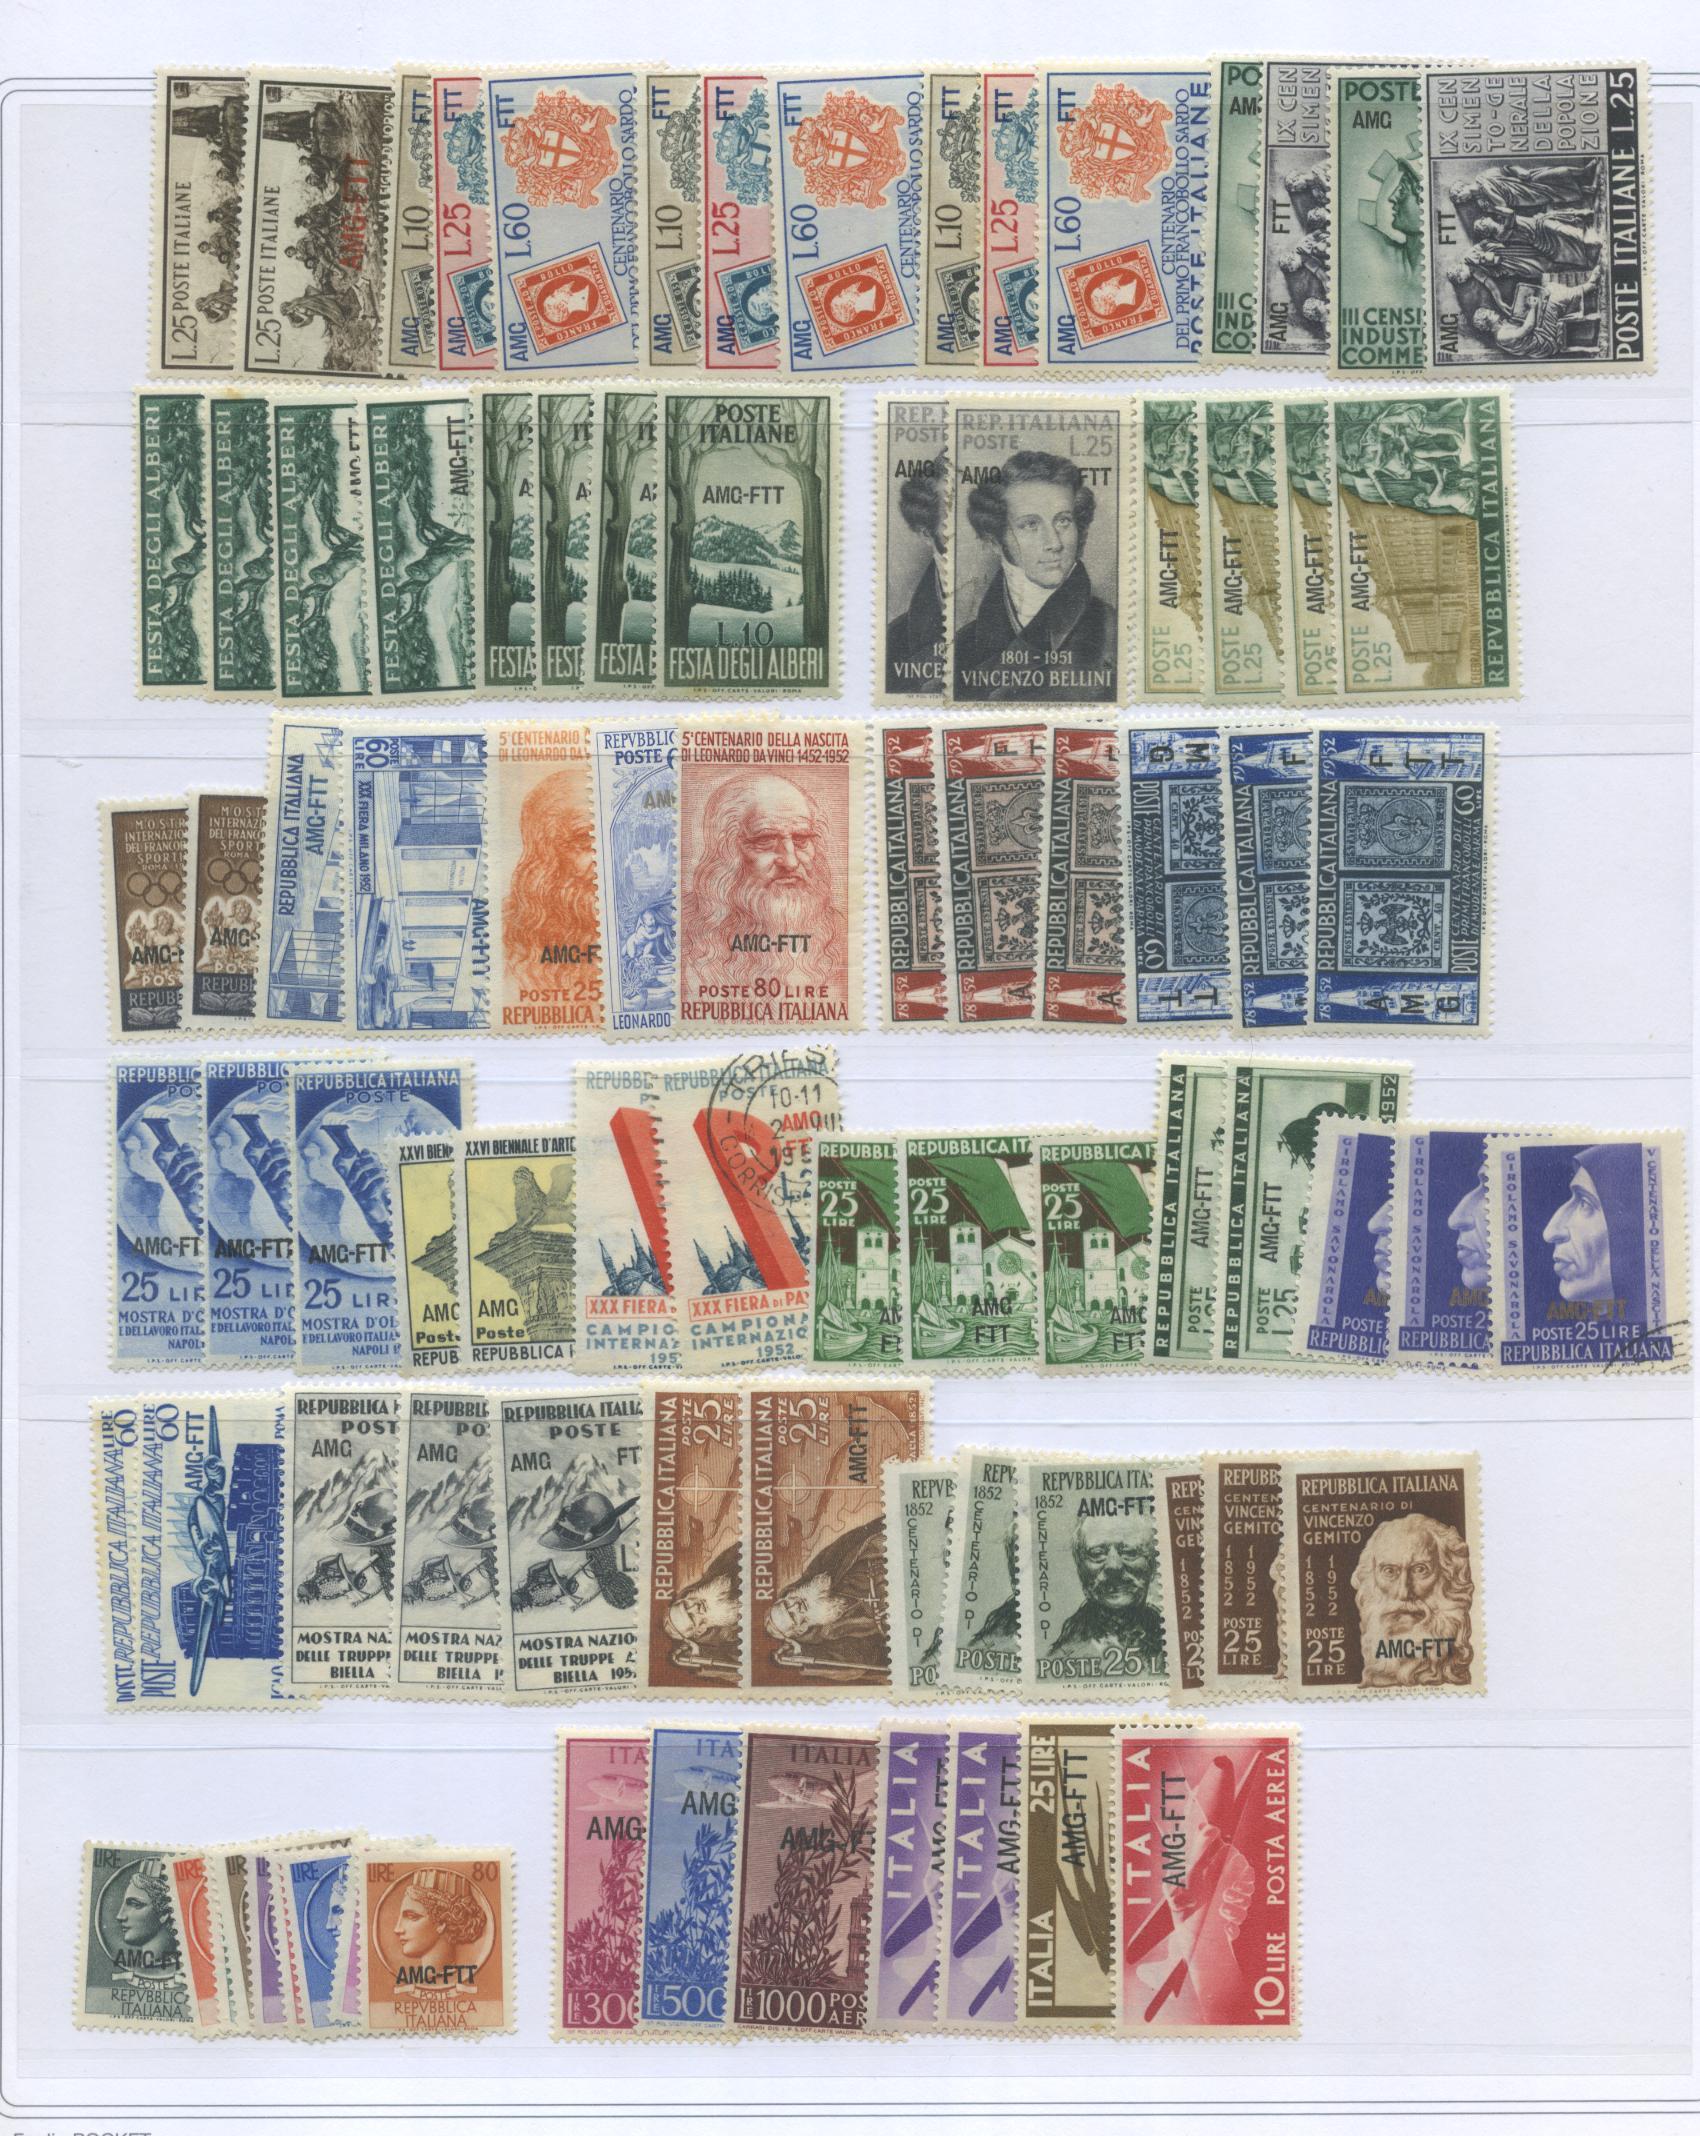 Scansione lotto: TRIESTE 1949/54 LOTTO SERIE CPL. N.2 */US